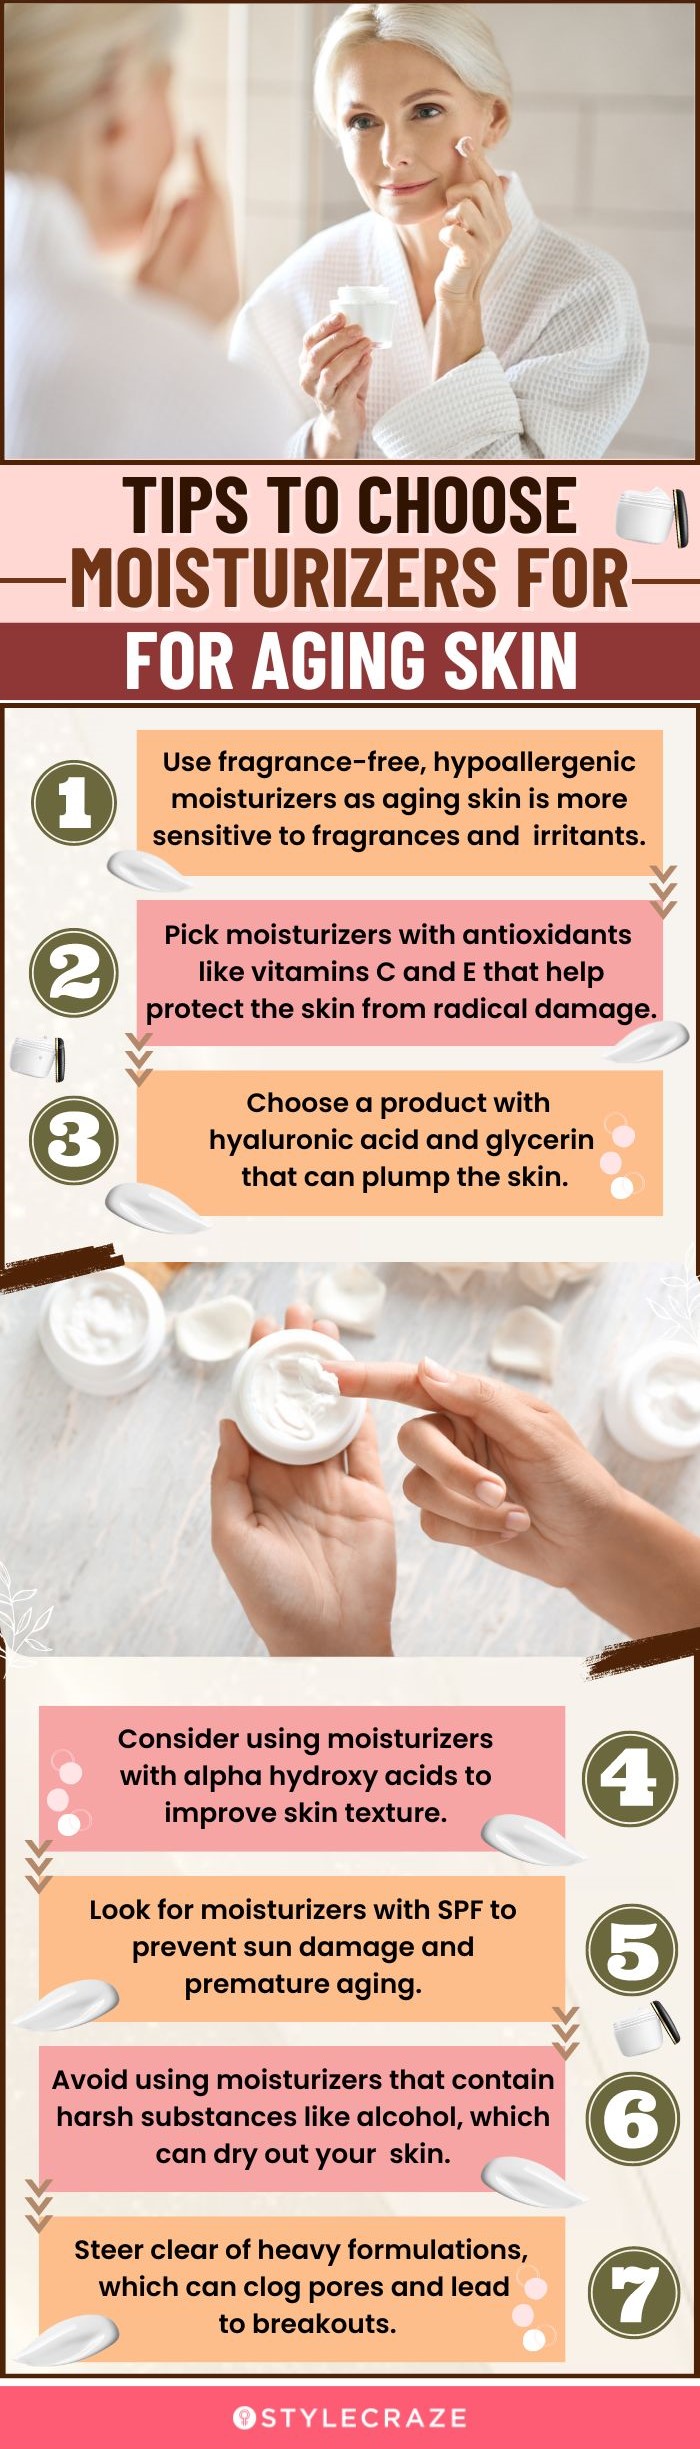 Tips To Choose Moisturizers For Aging Skin (infographic)